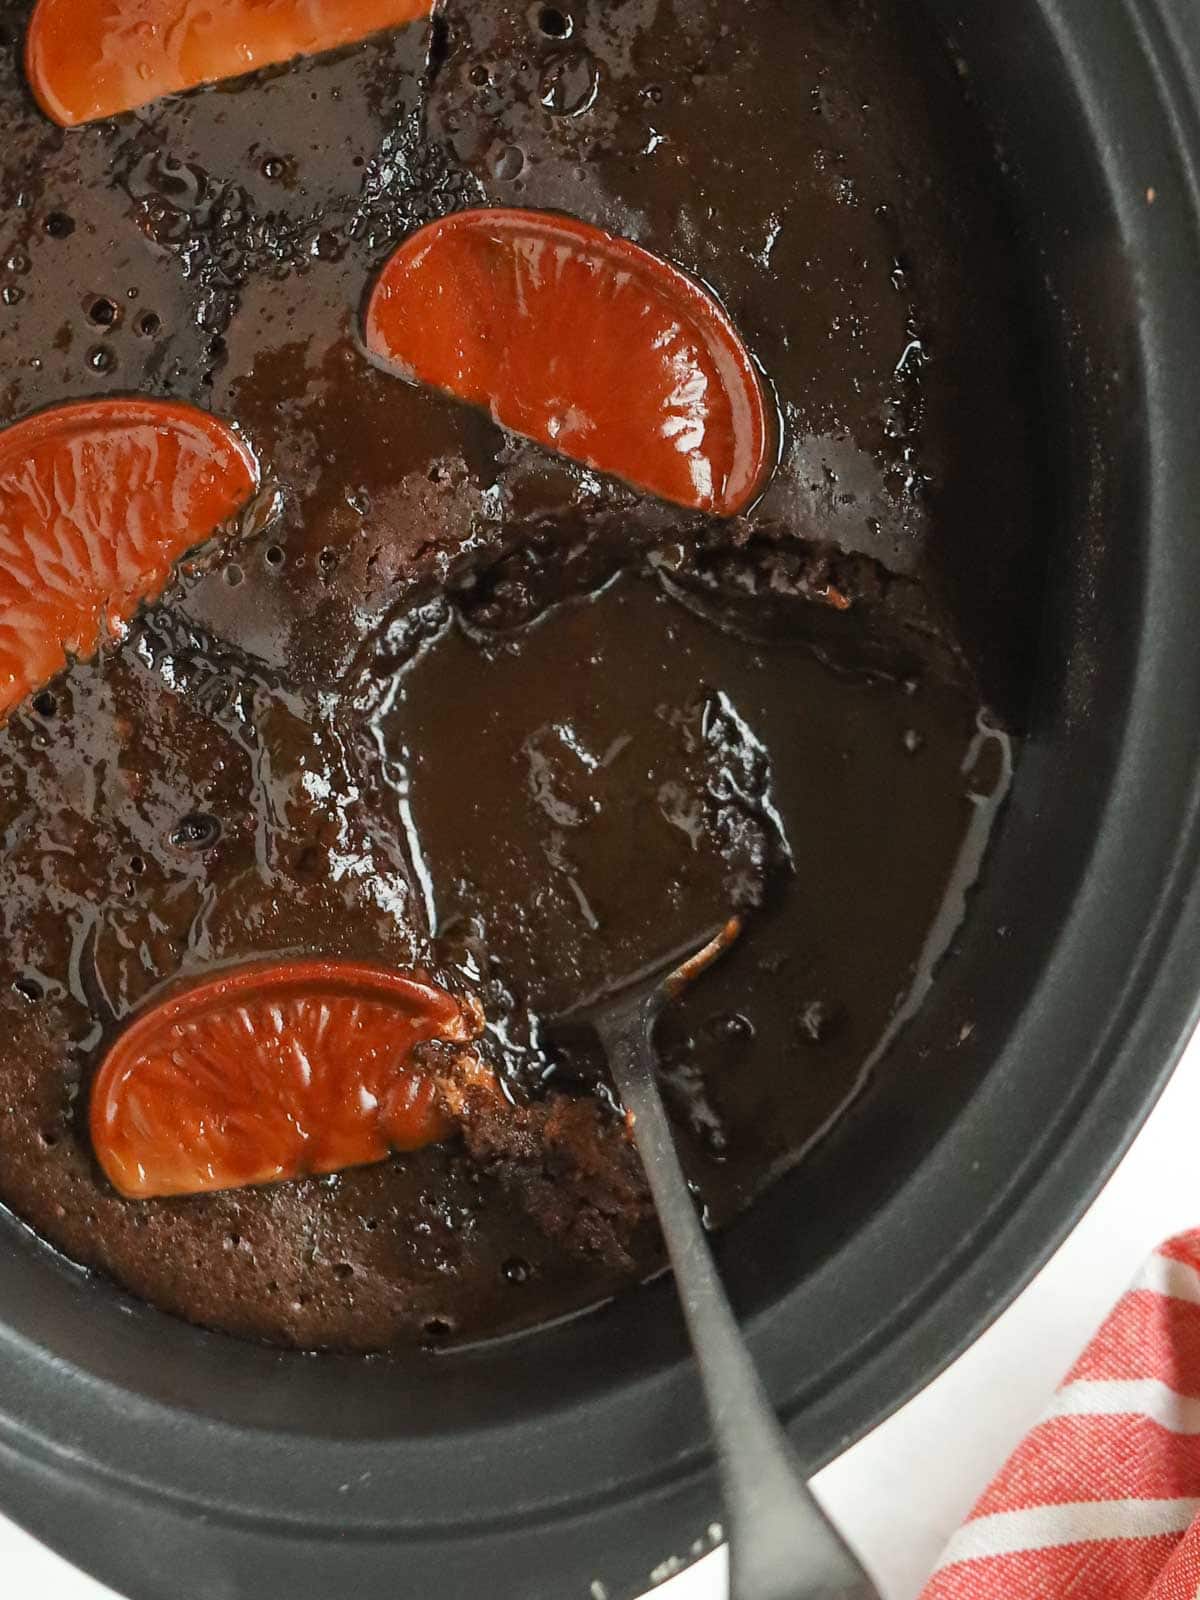 Close up of slow cooker pan with chocolate orange pudding inside.